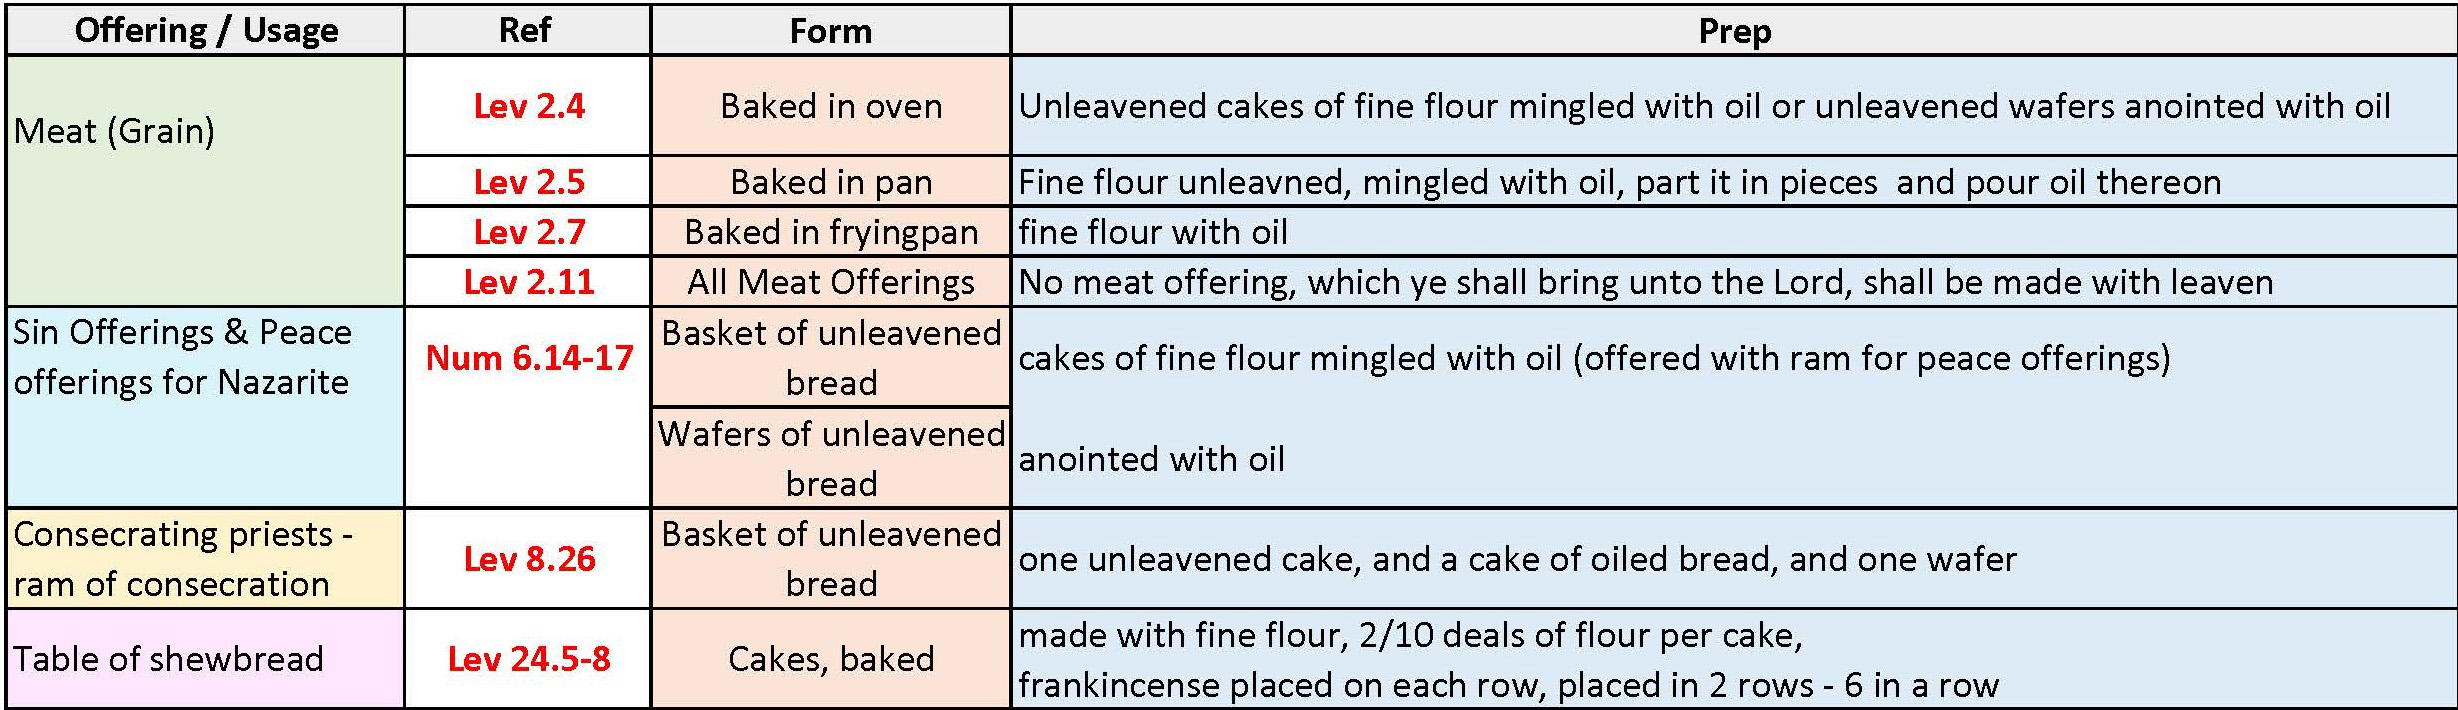 uses of unleavened bread with sacrifices etc